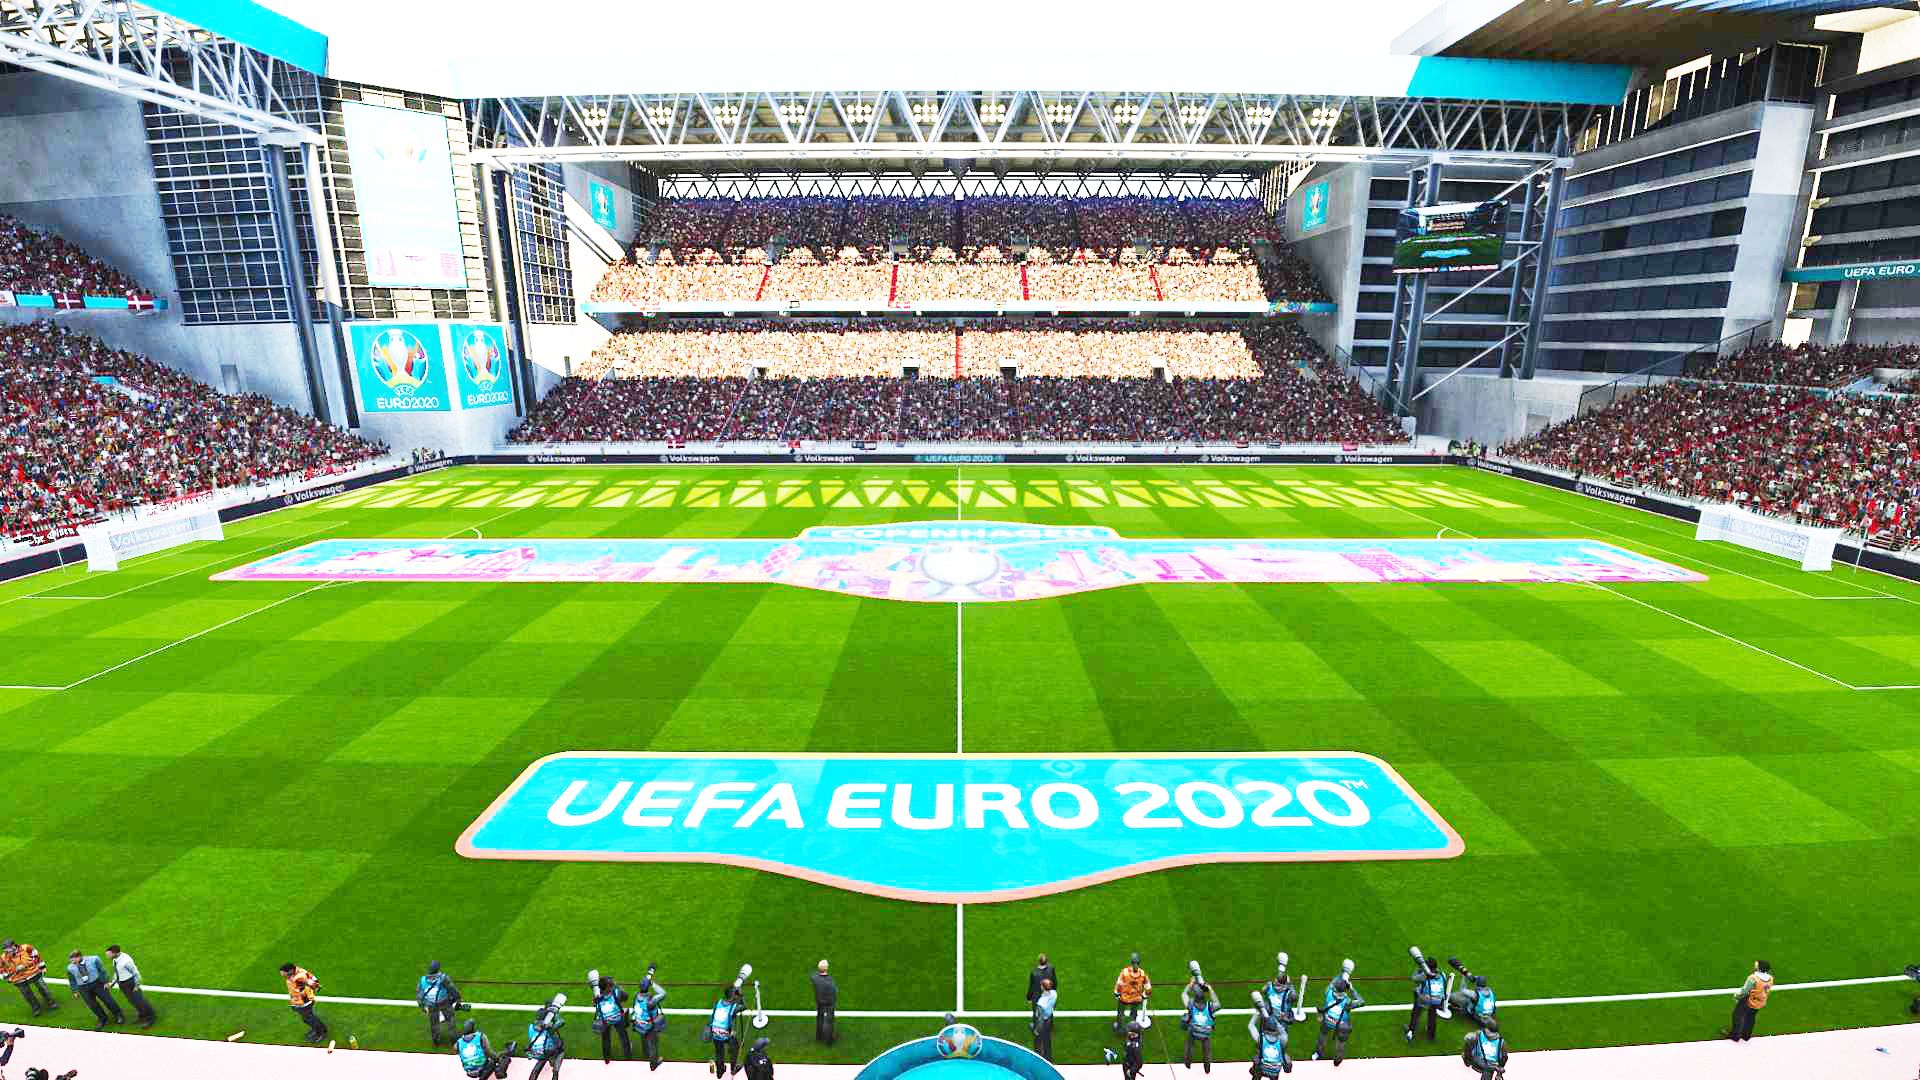 Ready to start in Euro 2020!